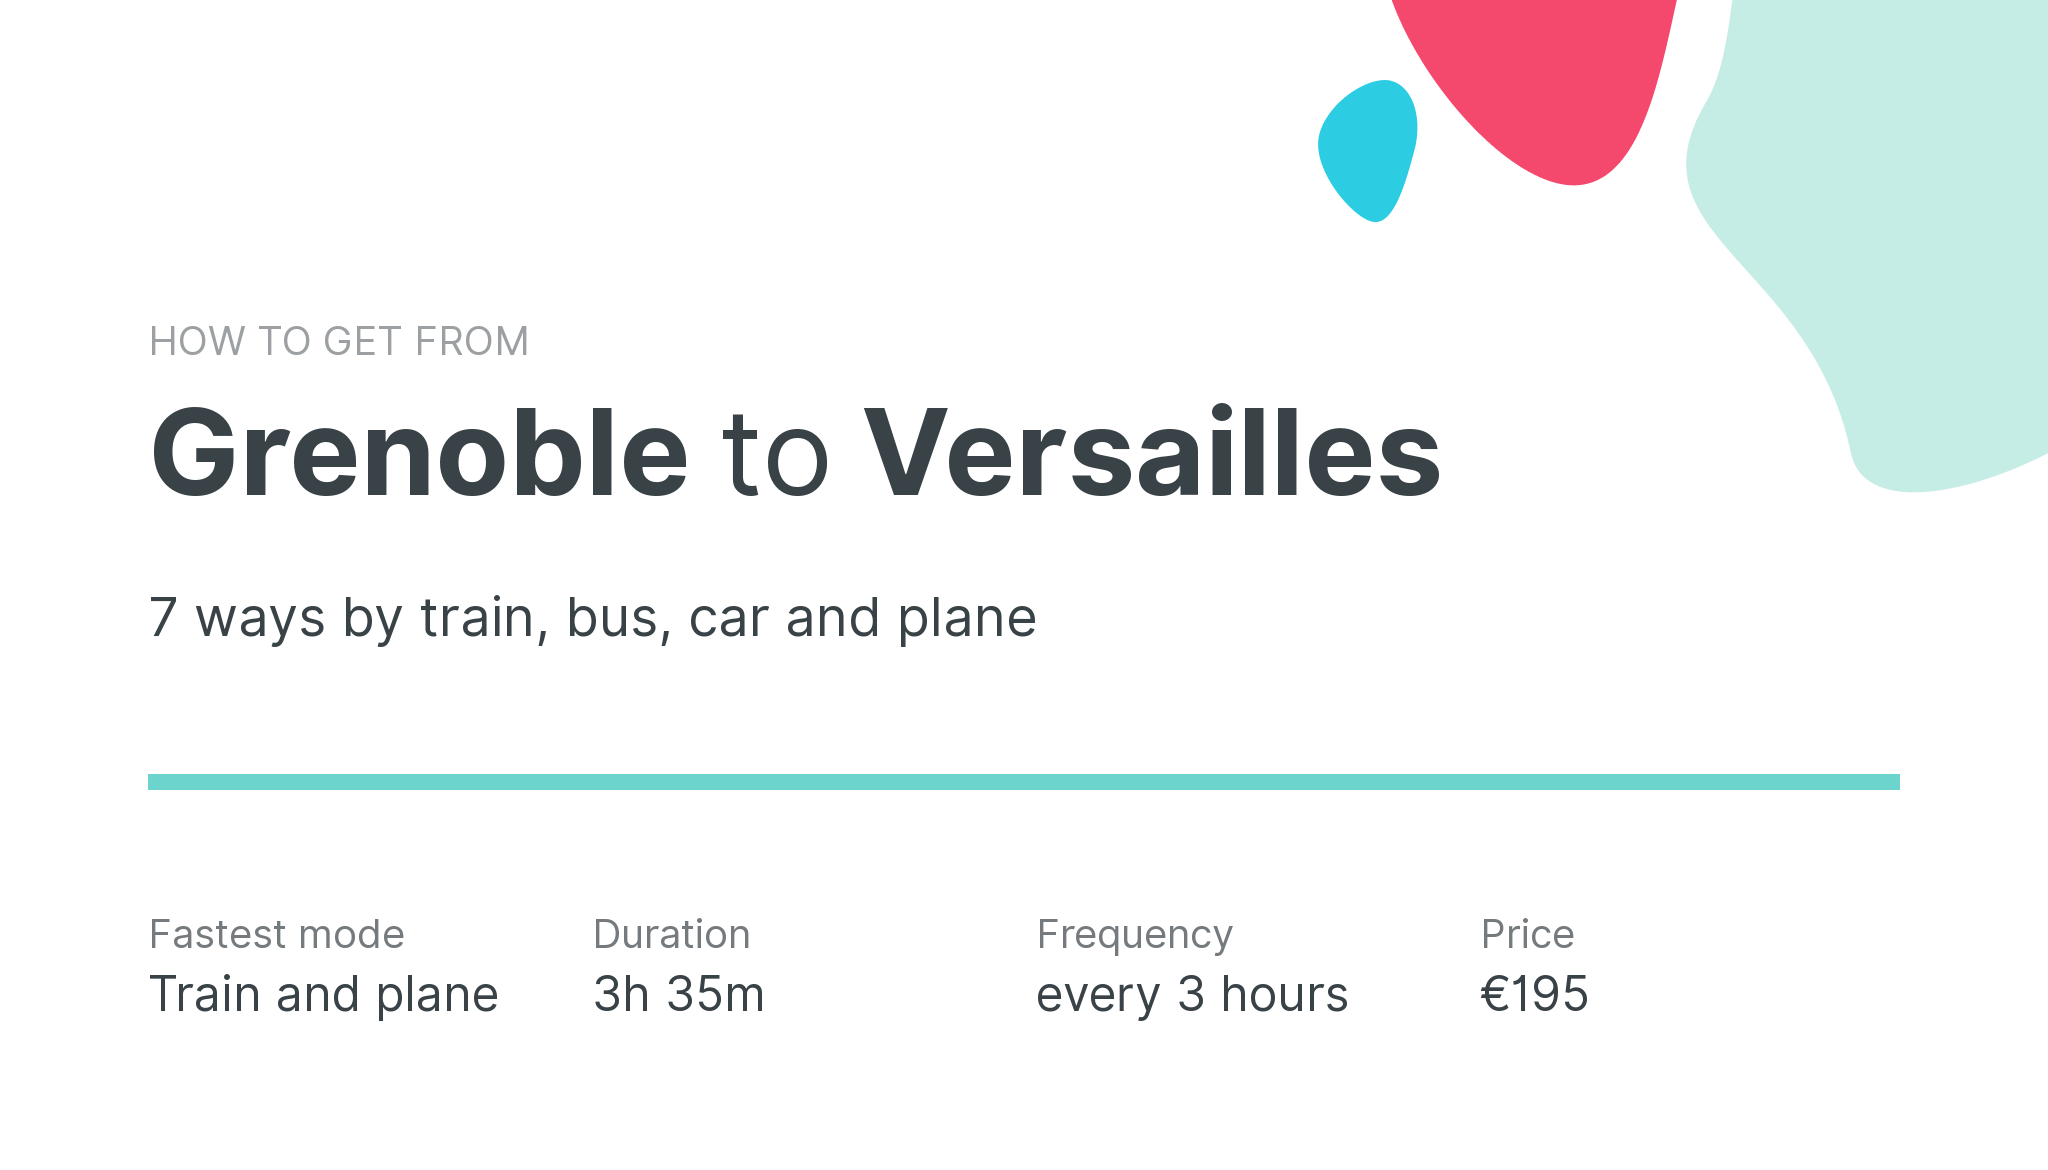 How do I get from Grenoble to Versailles